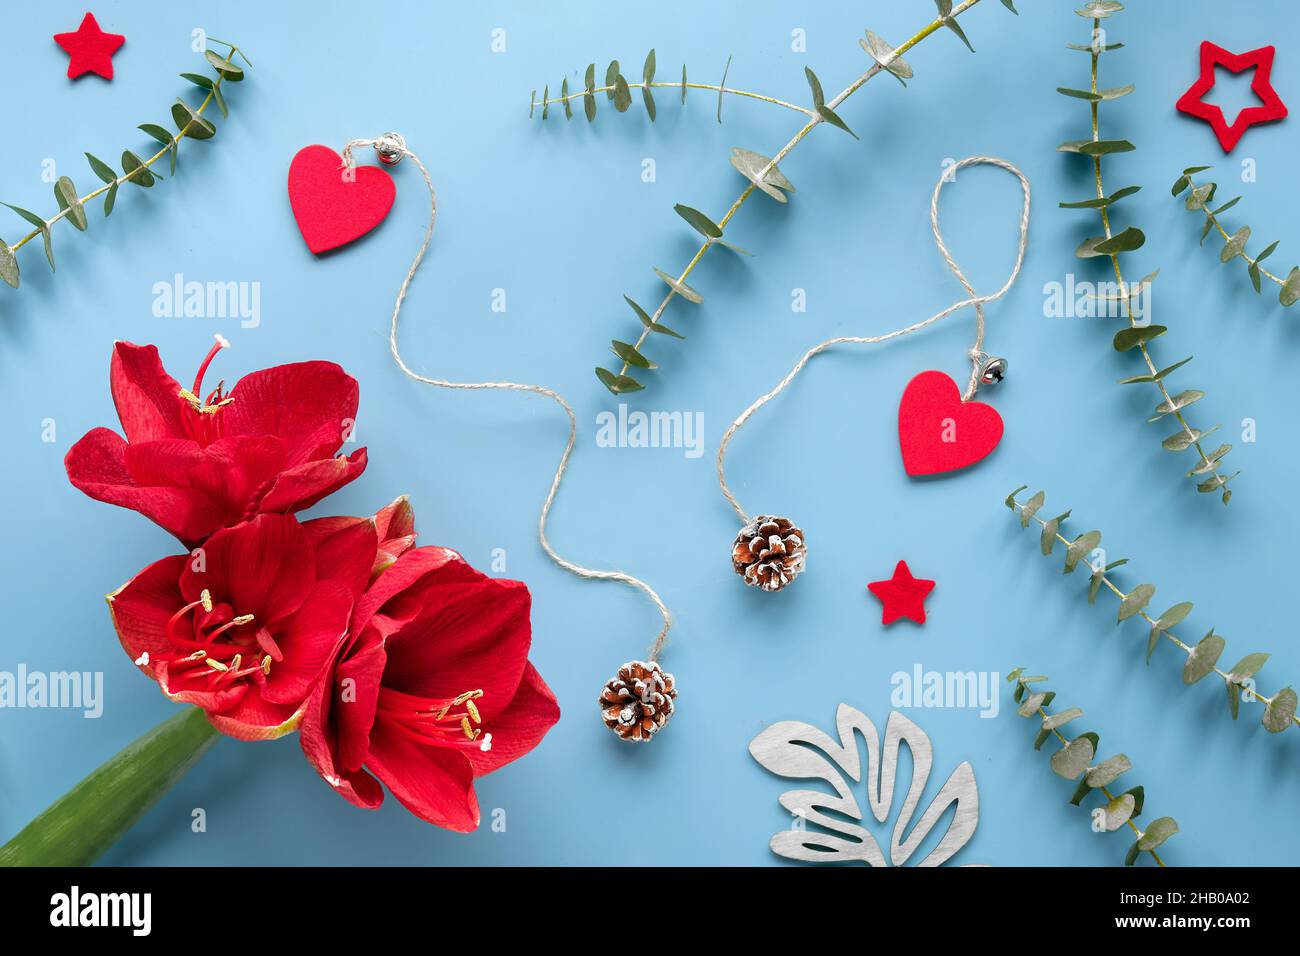 Red amaryllis flowers on blue mint background with eucalyptus, wood hearts, pine cones and exotic fern leaves. Stock Photo